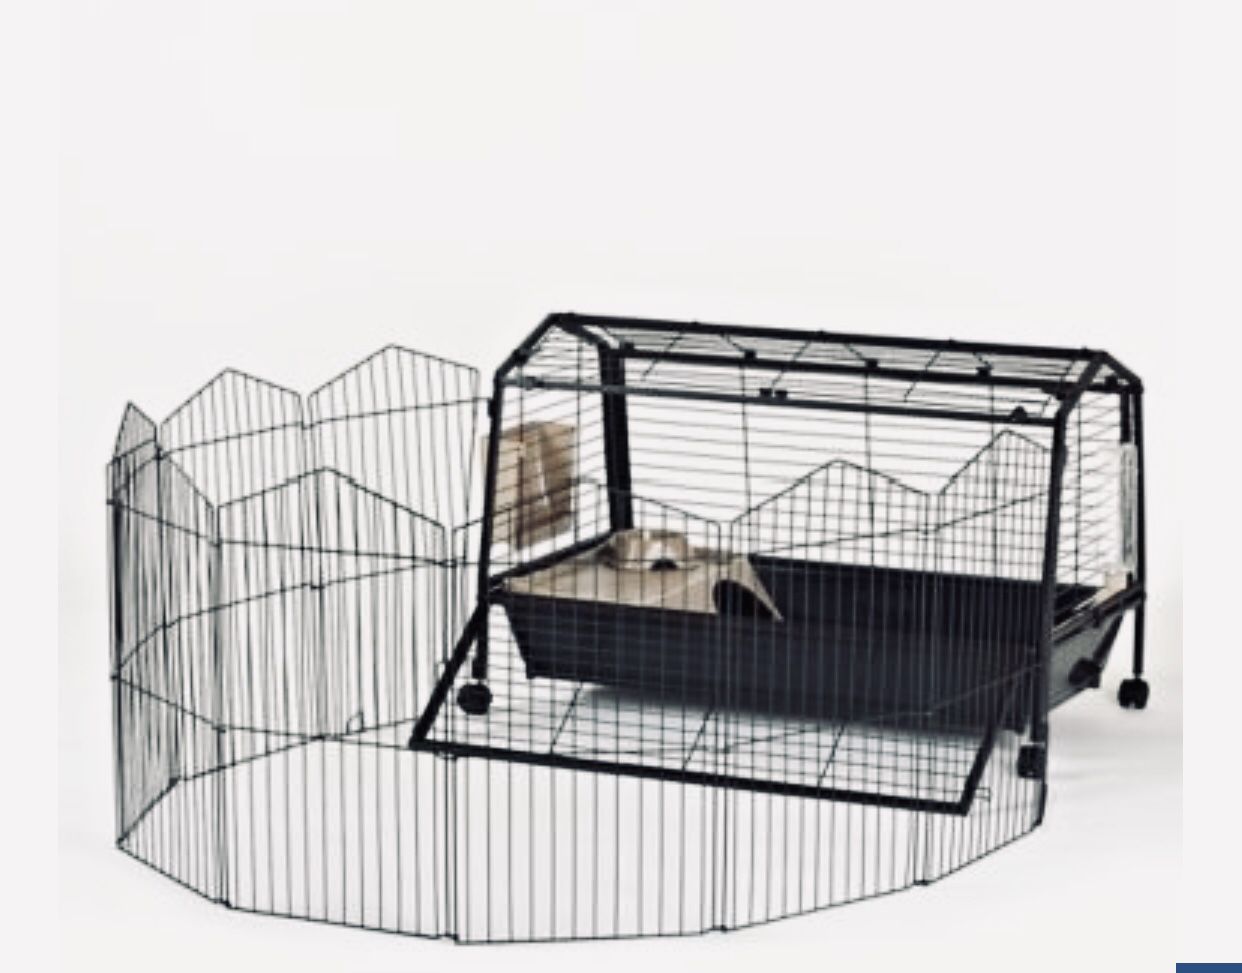 Rabbit cage with playpen